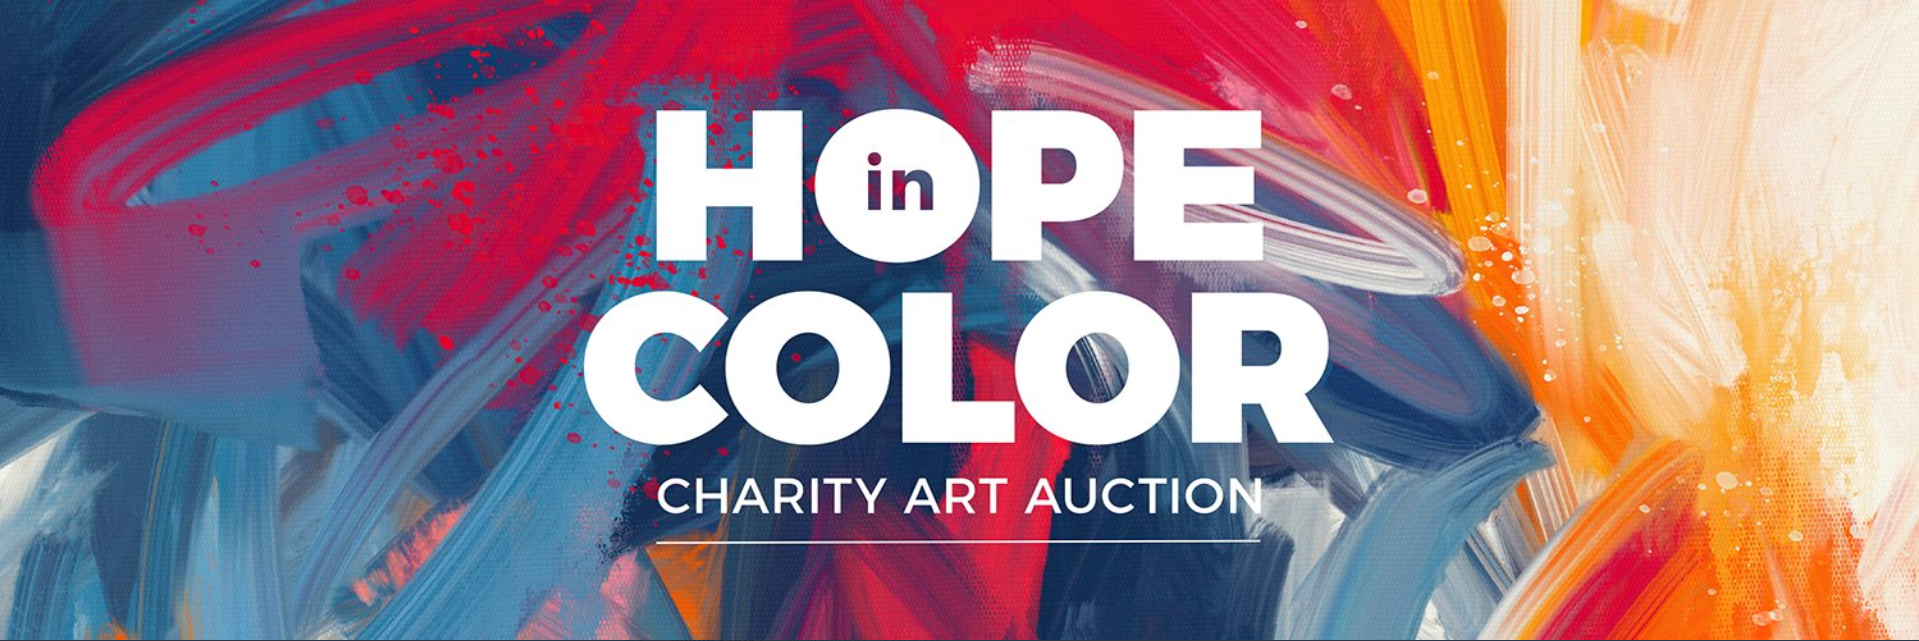 Hope In Color banner